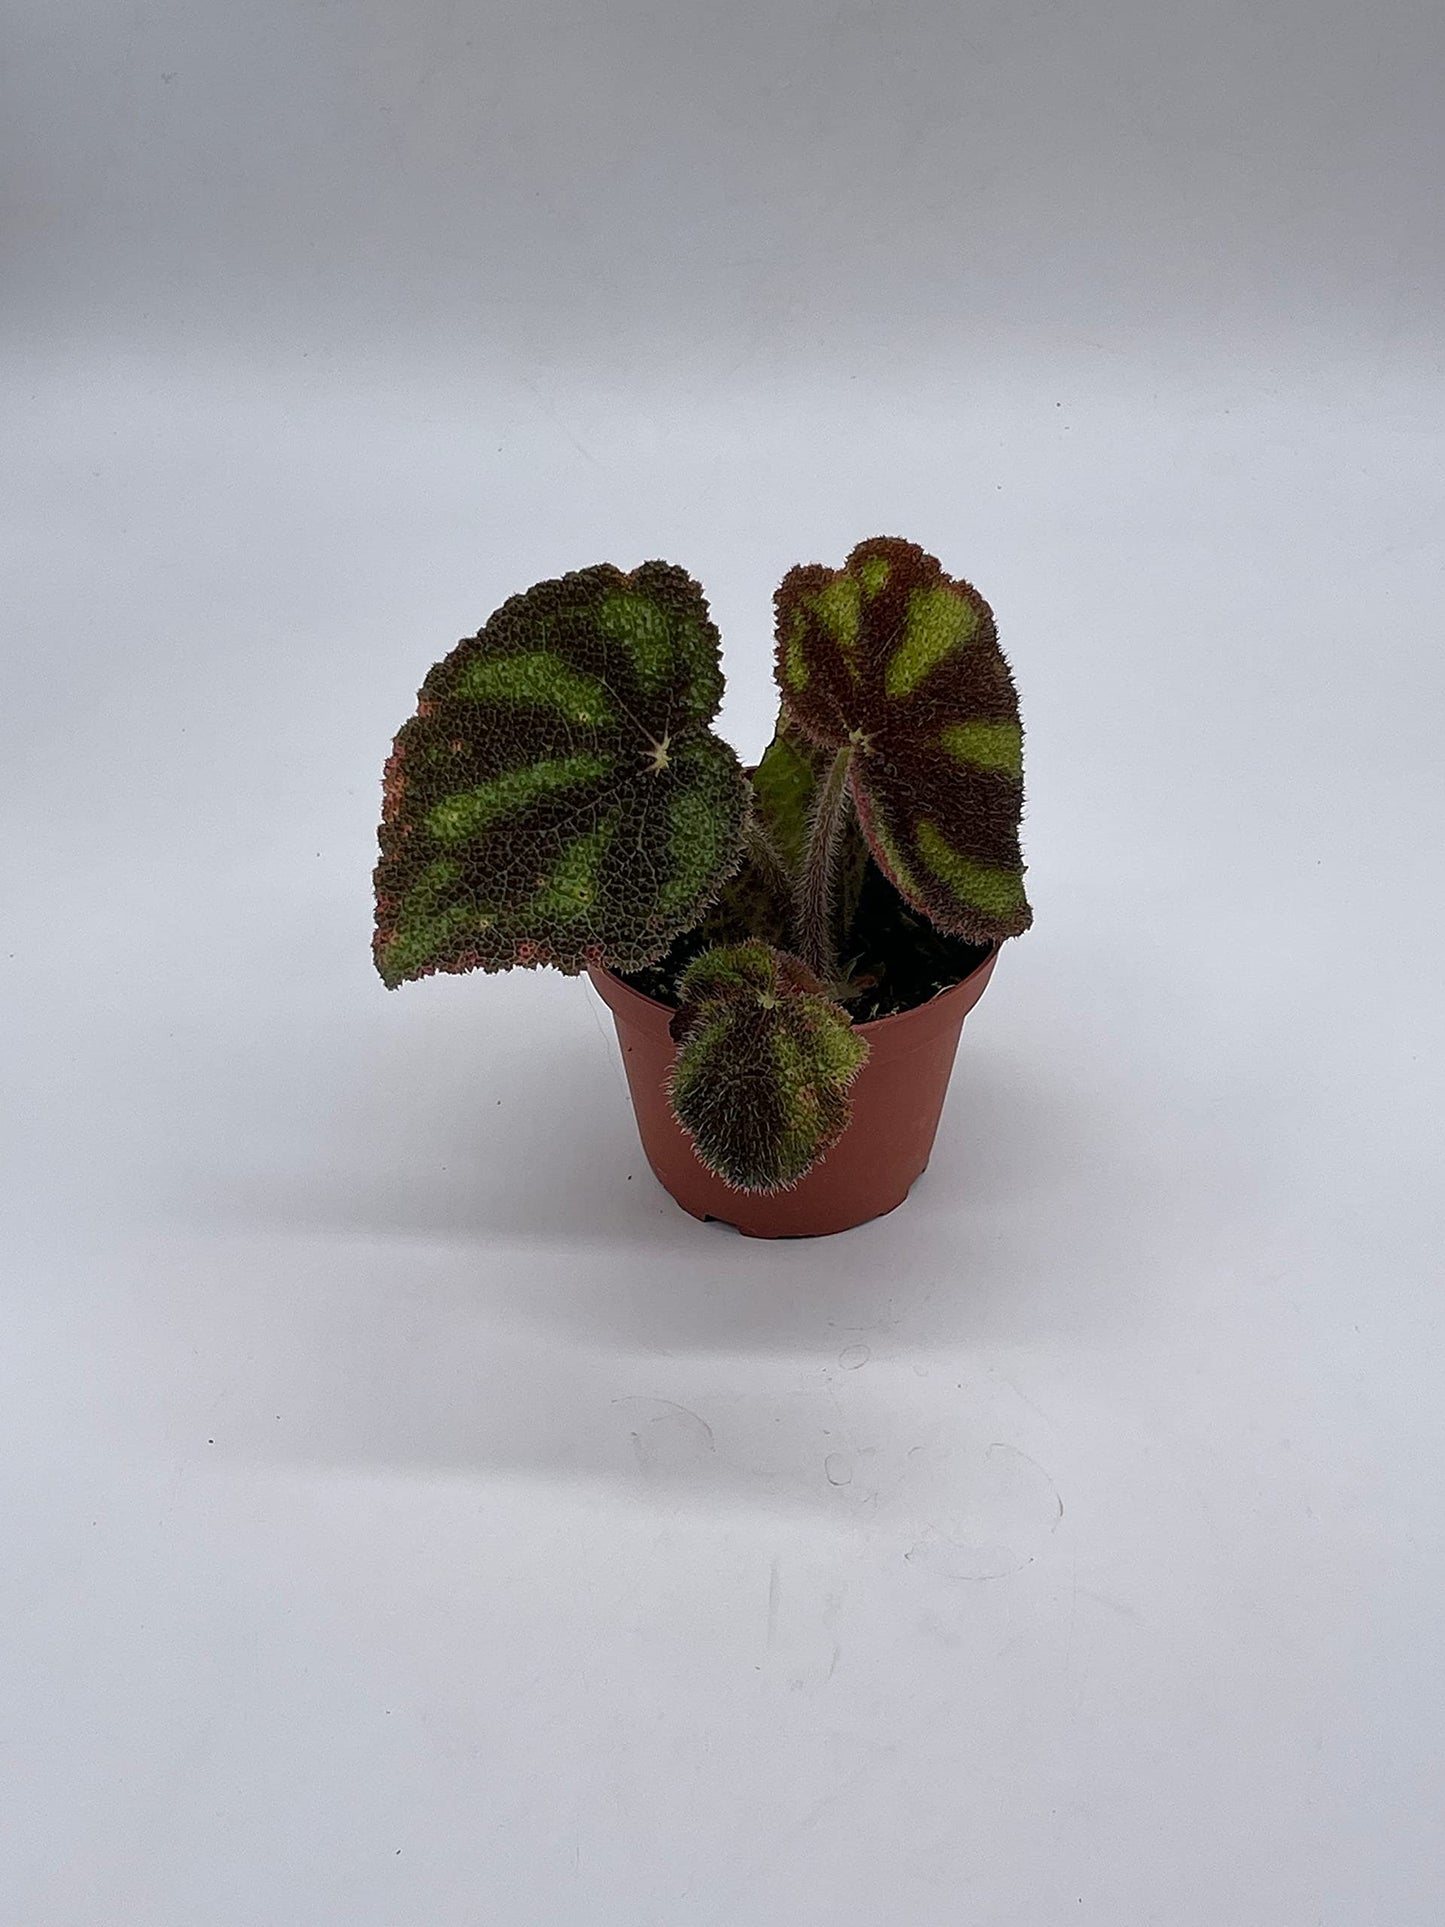 BubbleBlooms Harmony's Begonia Masoniana Variegata, 4 inch, Very Rare Homegrown Exclusive Unique Variegated Begonia